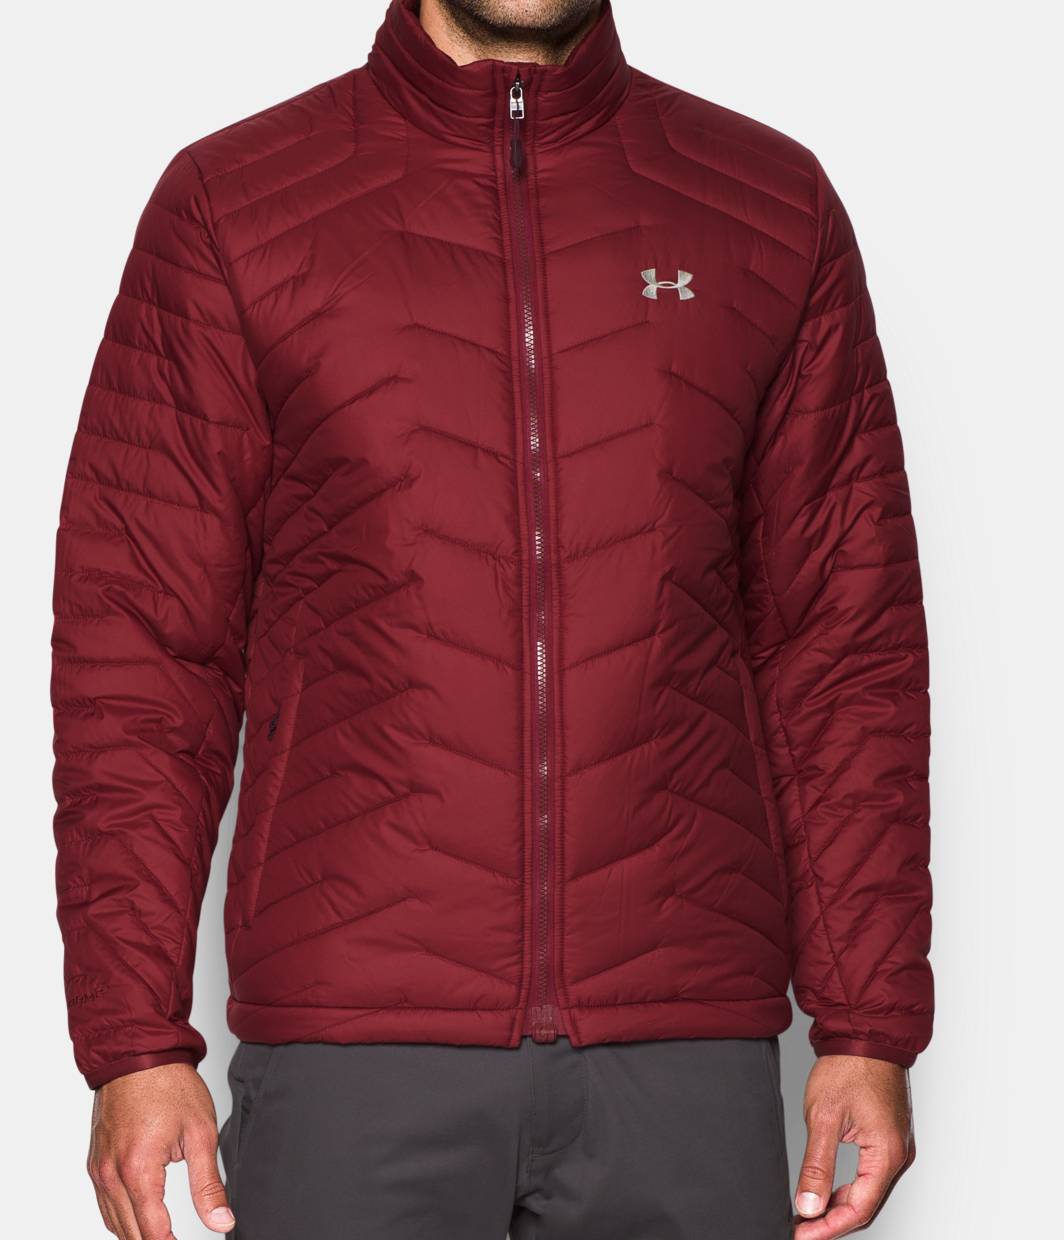 Under Armour Jackets - ColdGear Reactor Jacket Review — GYMCADDY